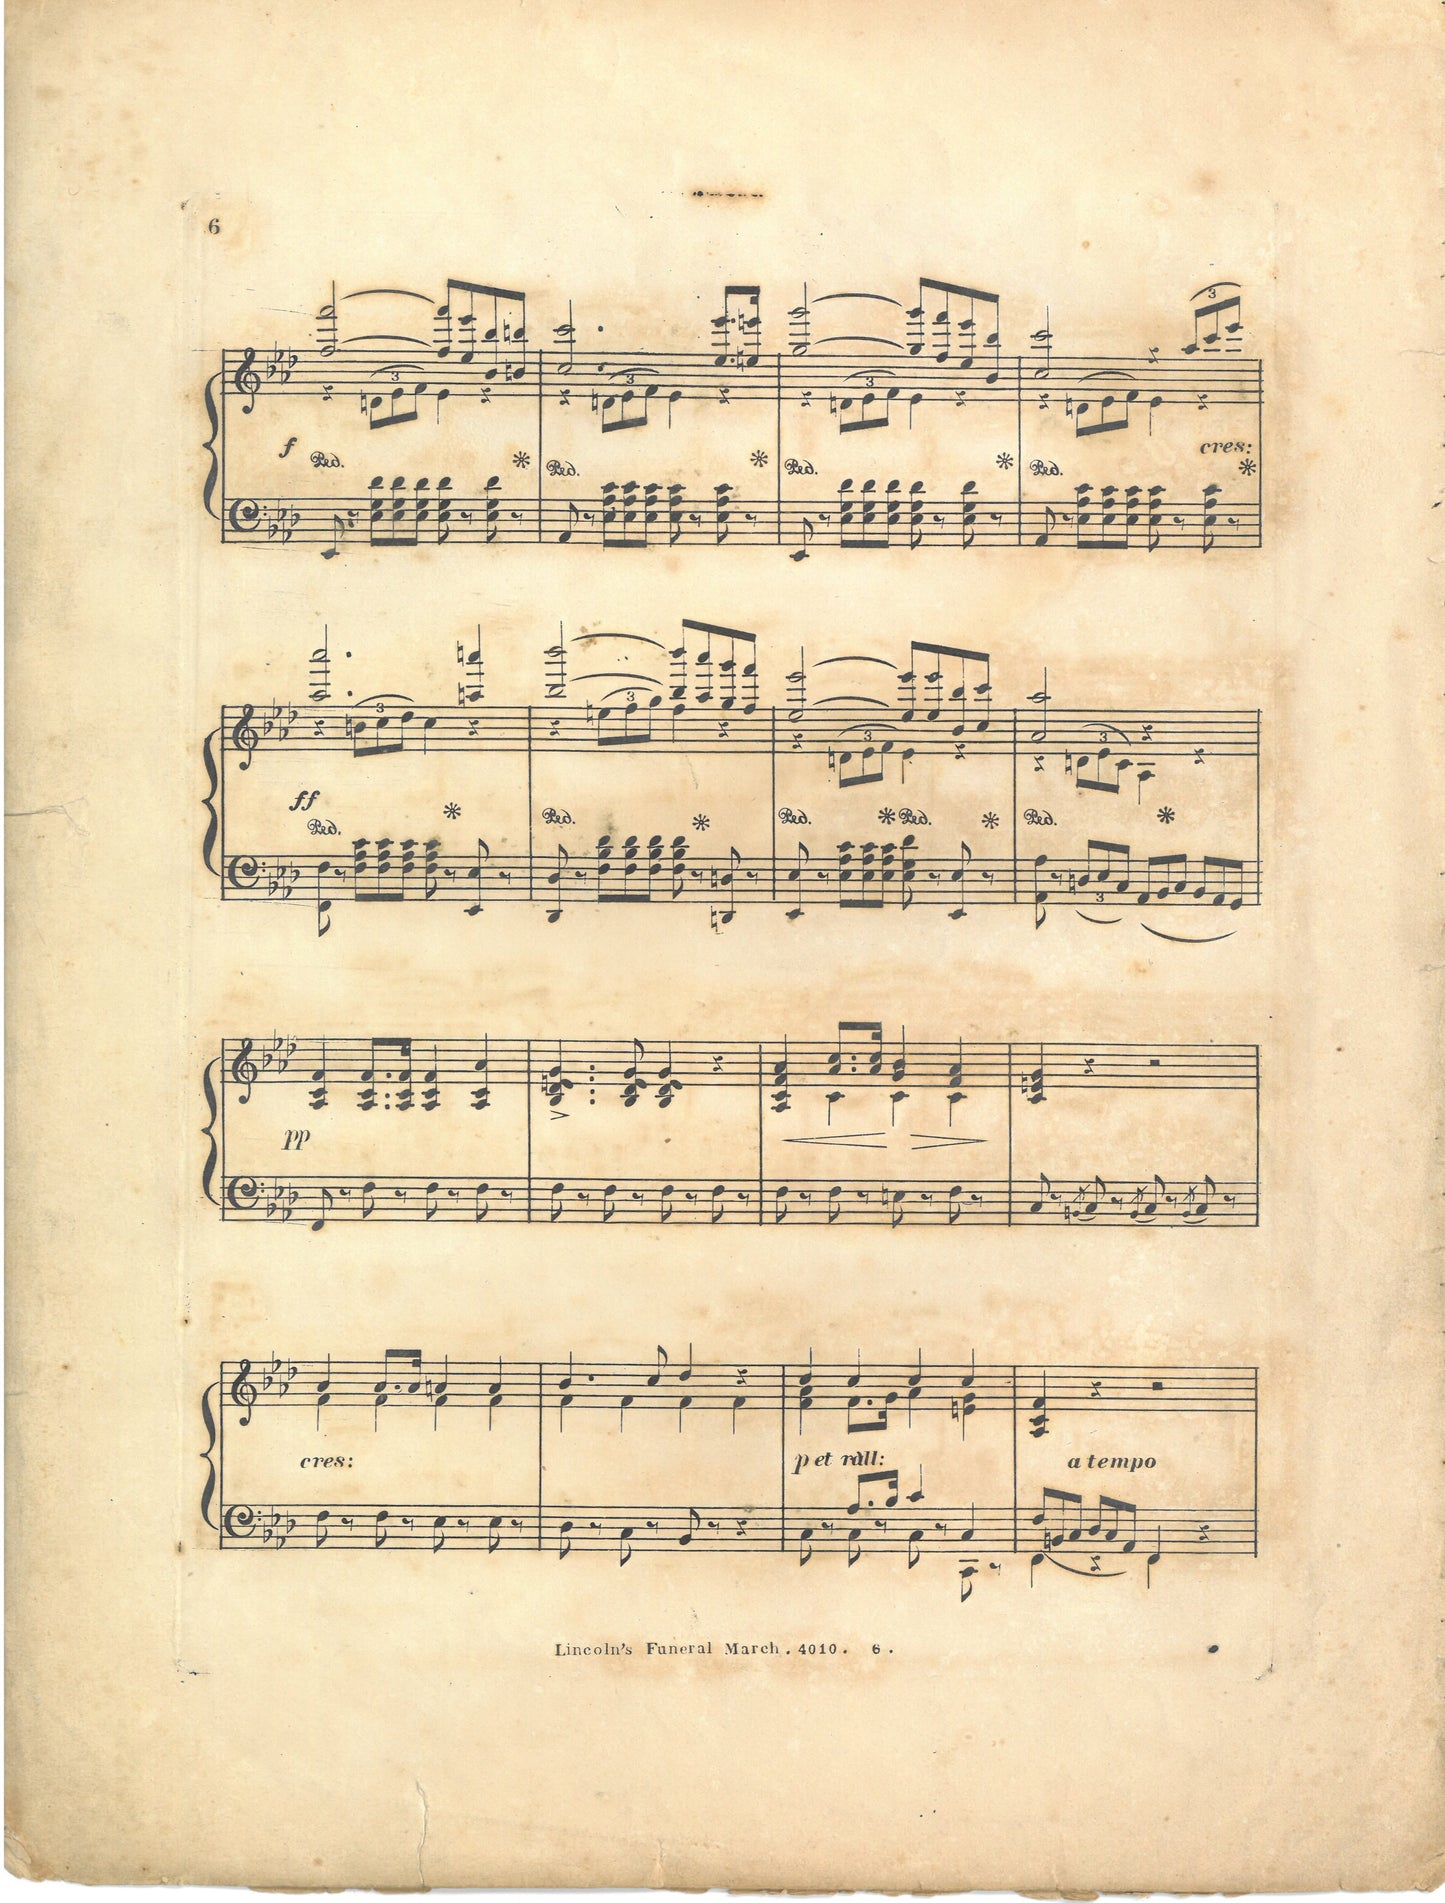 Rare Copy of LINCOLN'S FUNERAL MARCH Sheet Music by Charles Hess ©1865